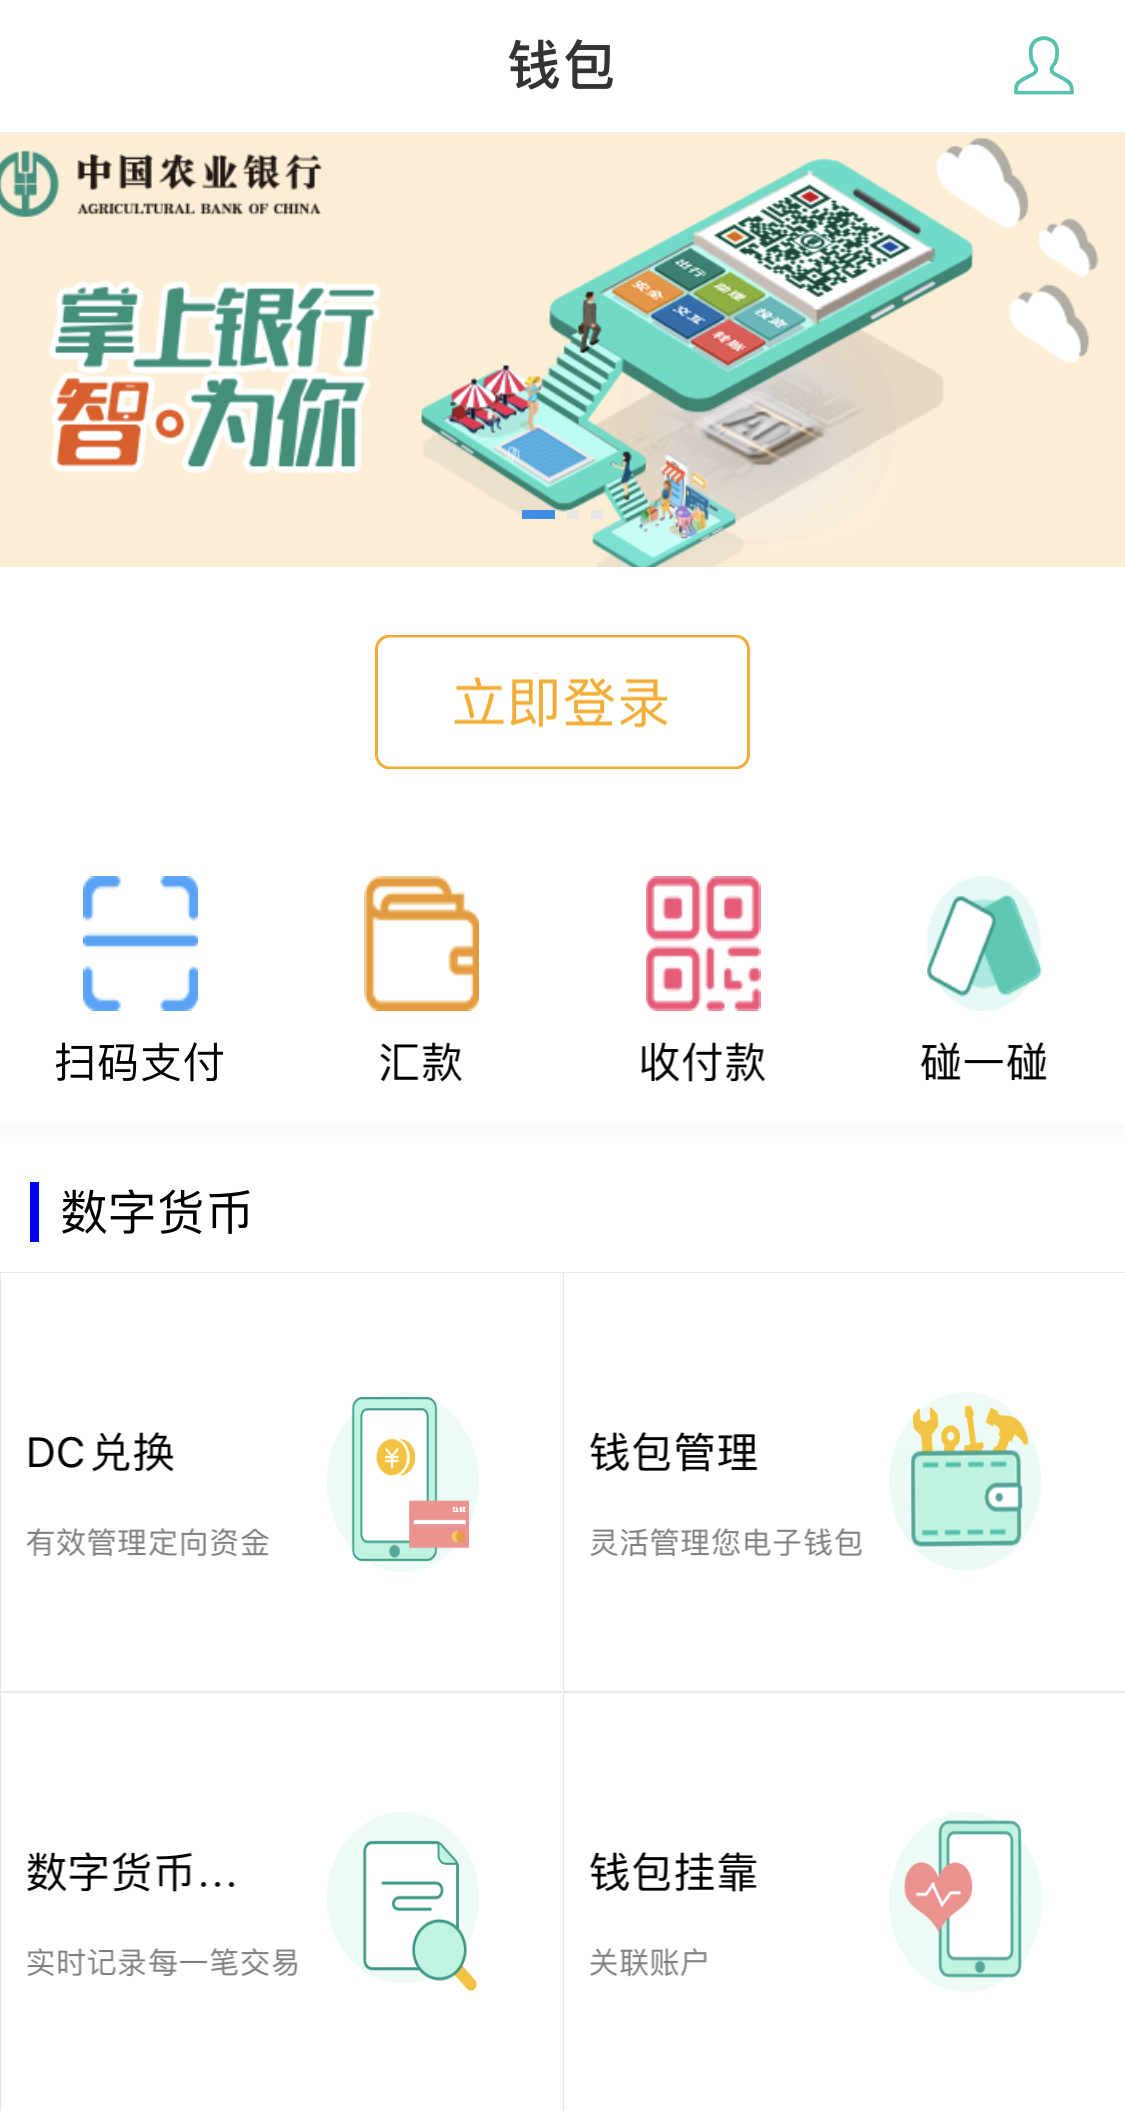 Chinese State Bank has released a test version of the mobile application for the digital renminbi